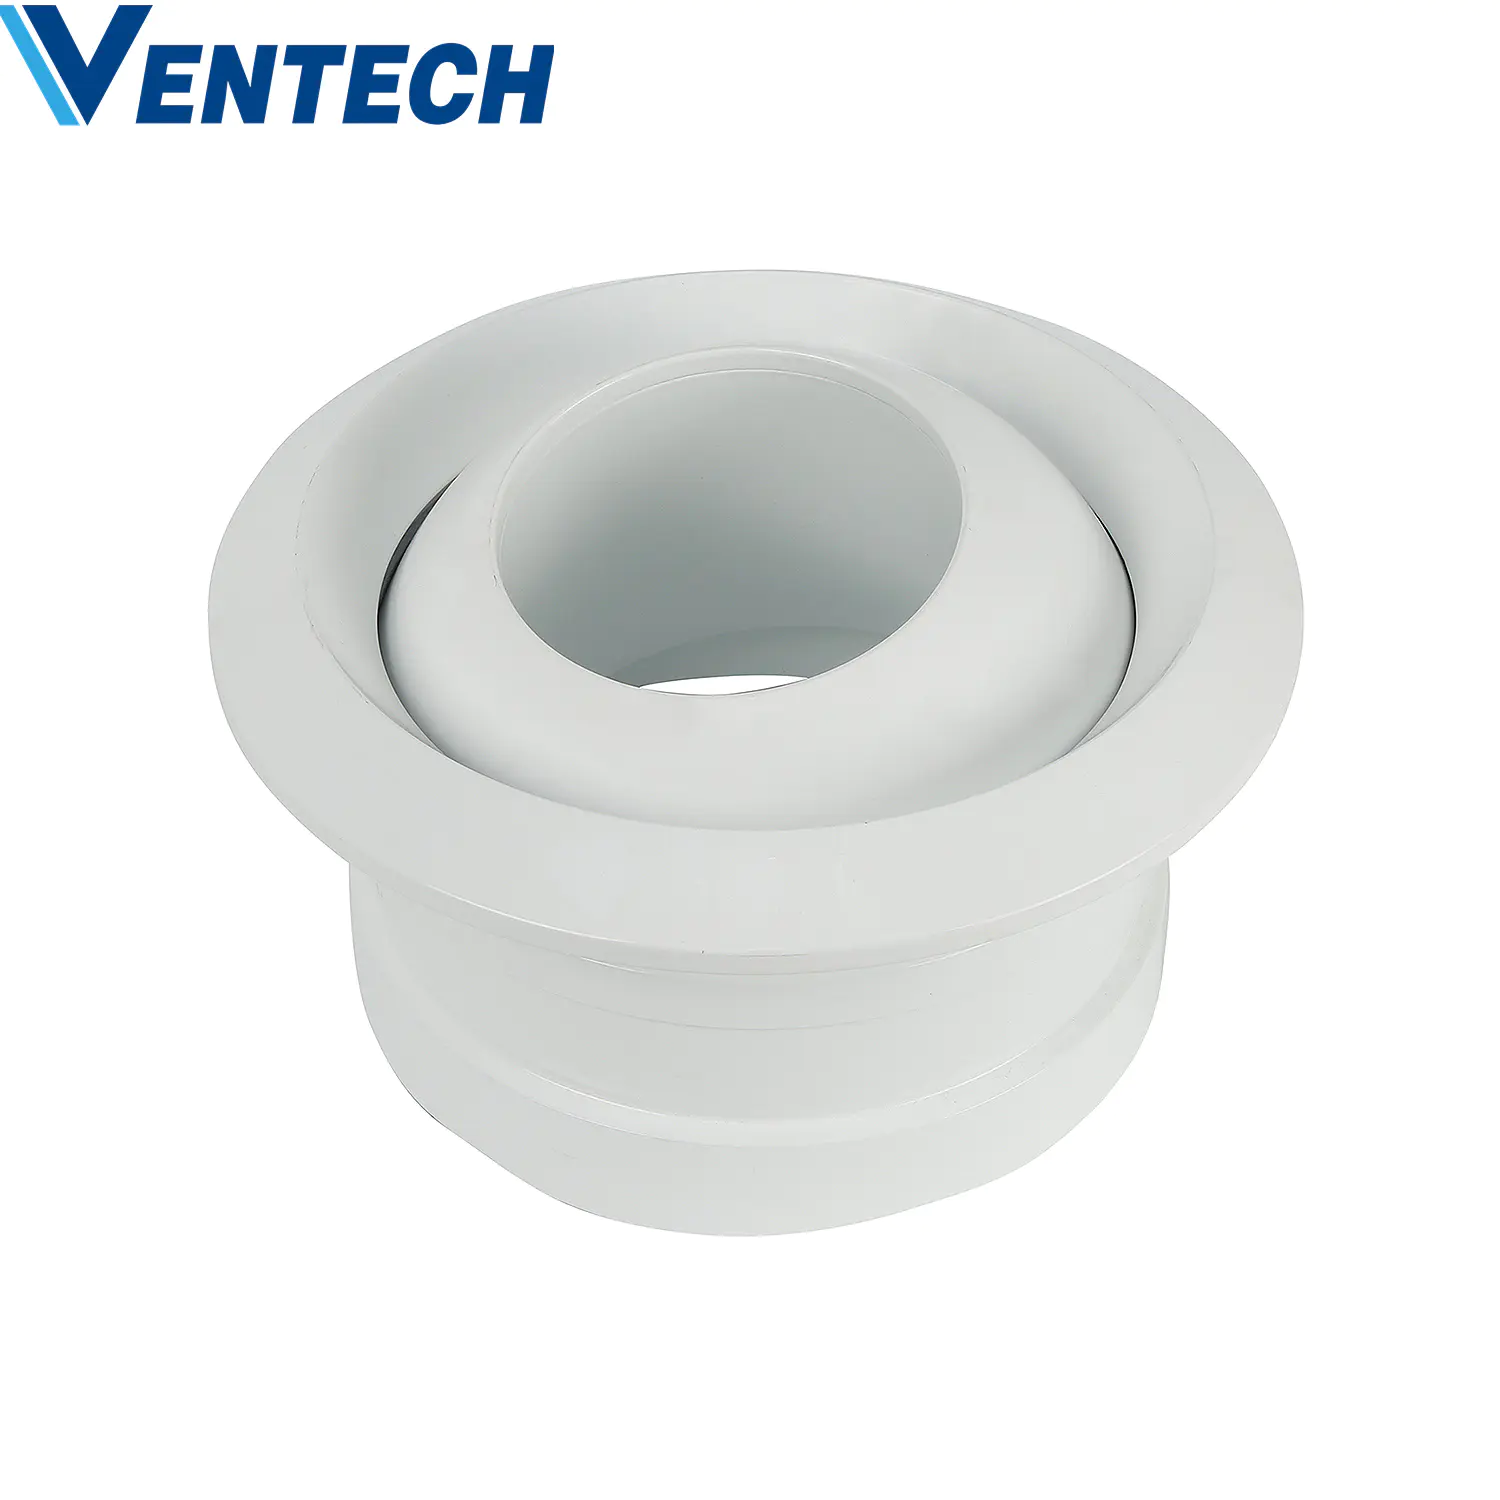 Hvac System Aluminium Supply Air Ceiling Duct Diffuser Conditioning Round Ball Spout Jet Air Nozzle Diffuser